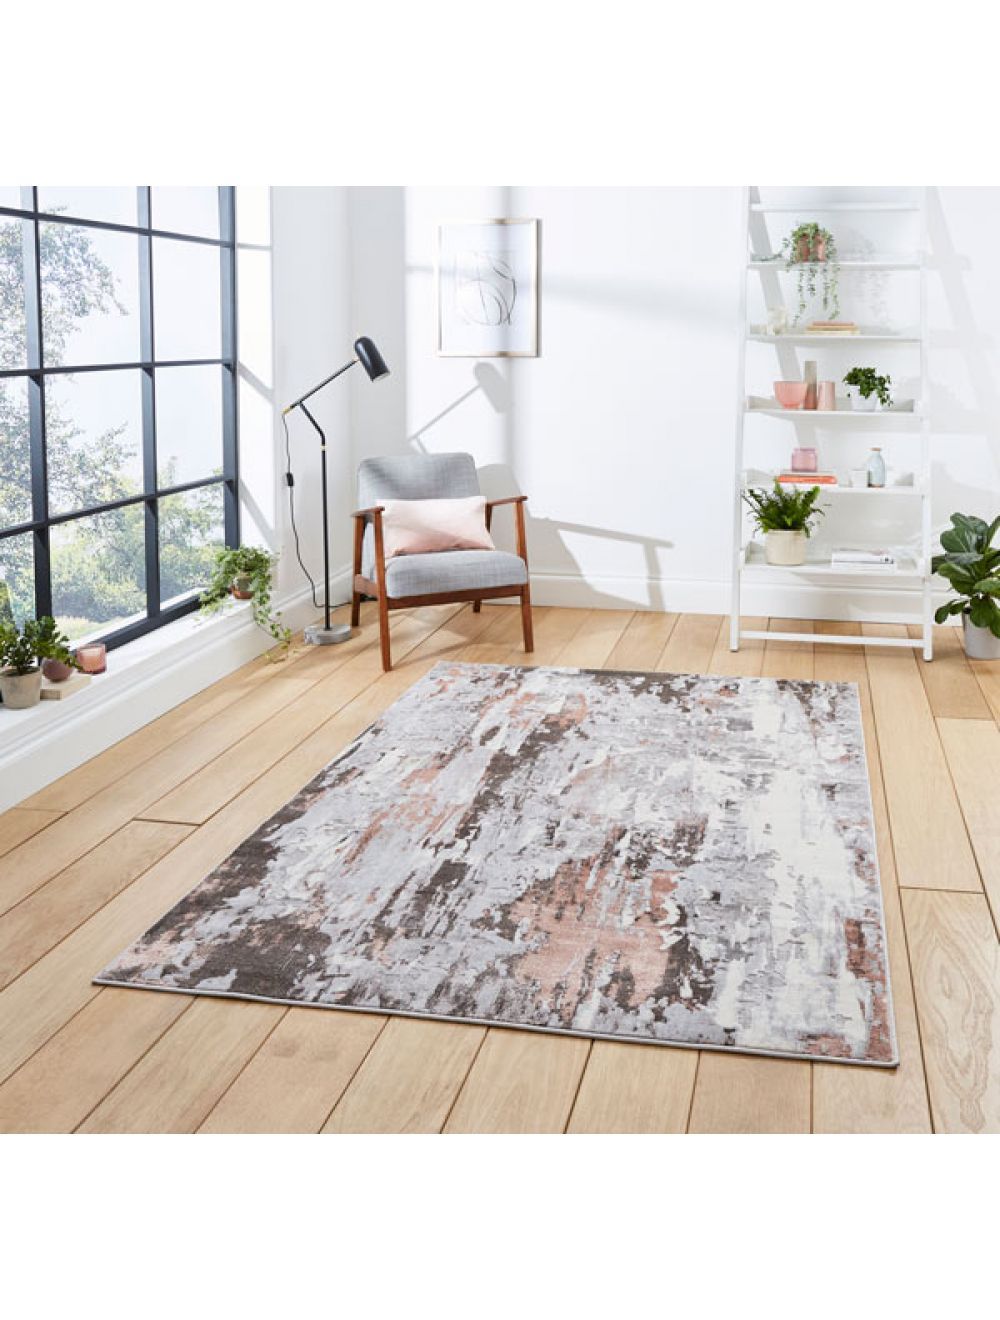 Buy Think Rugs Gr580 Apollo Grey / Pink Rose Abstract Rug | Free Uk Delivery Pertaining To Apollo Rugs (View 9 of 15)